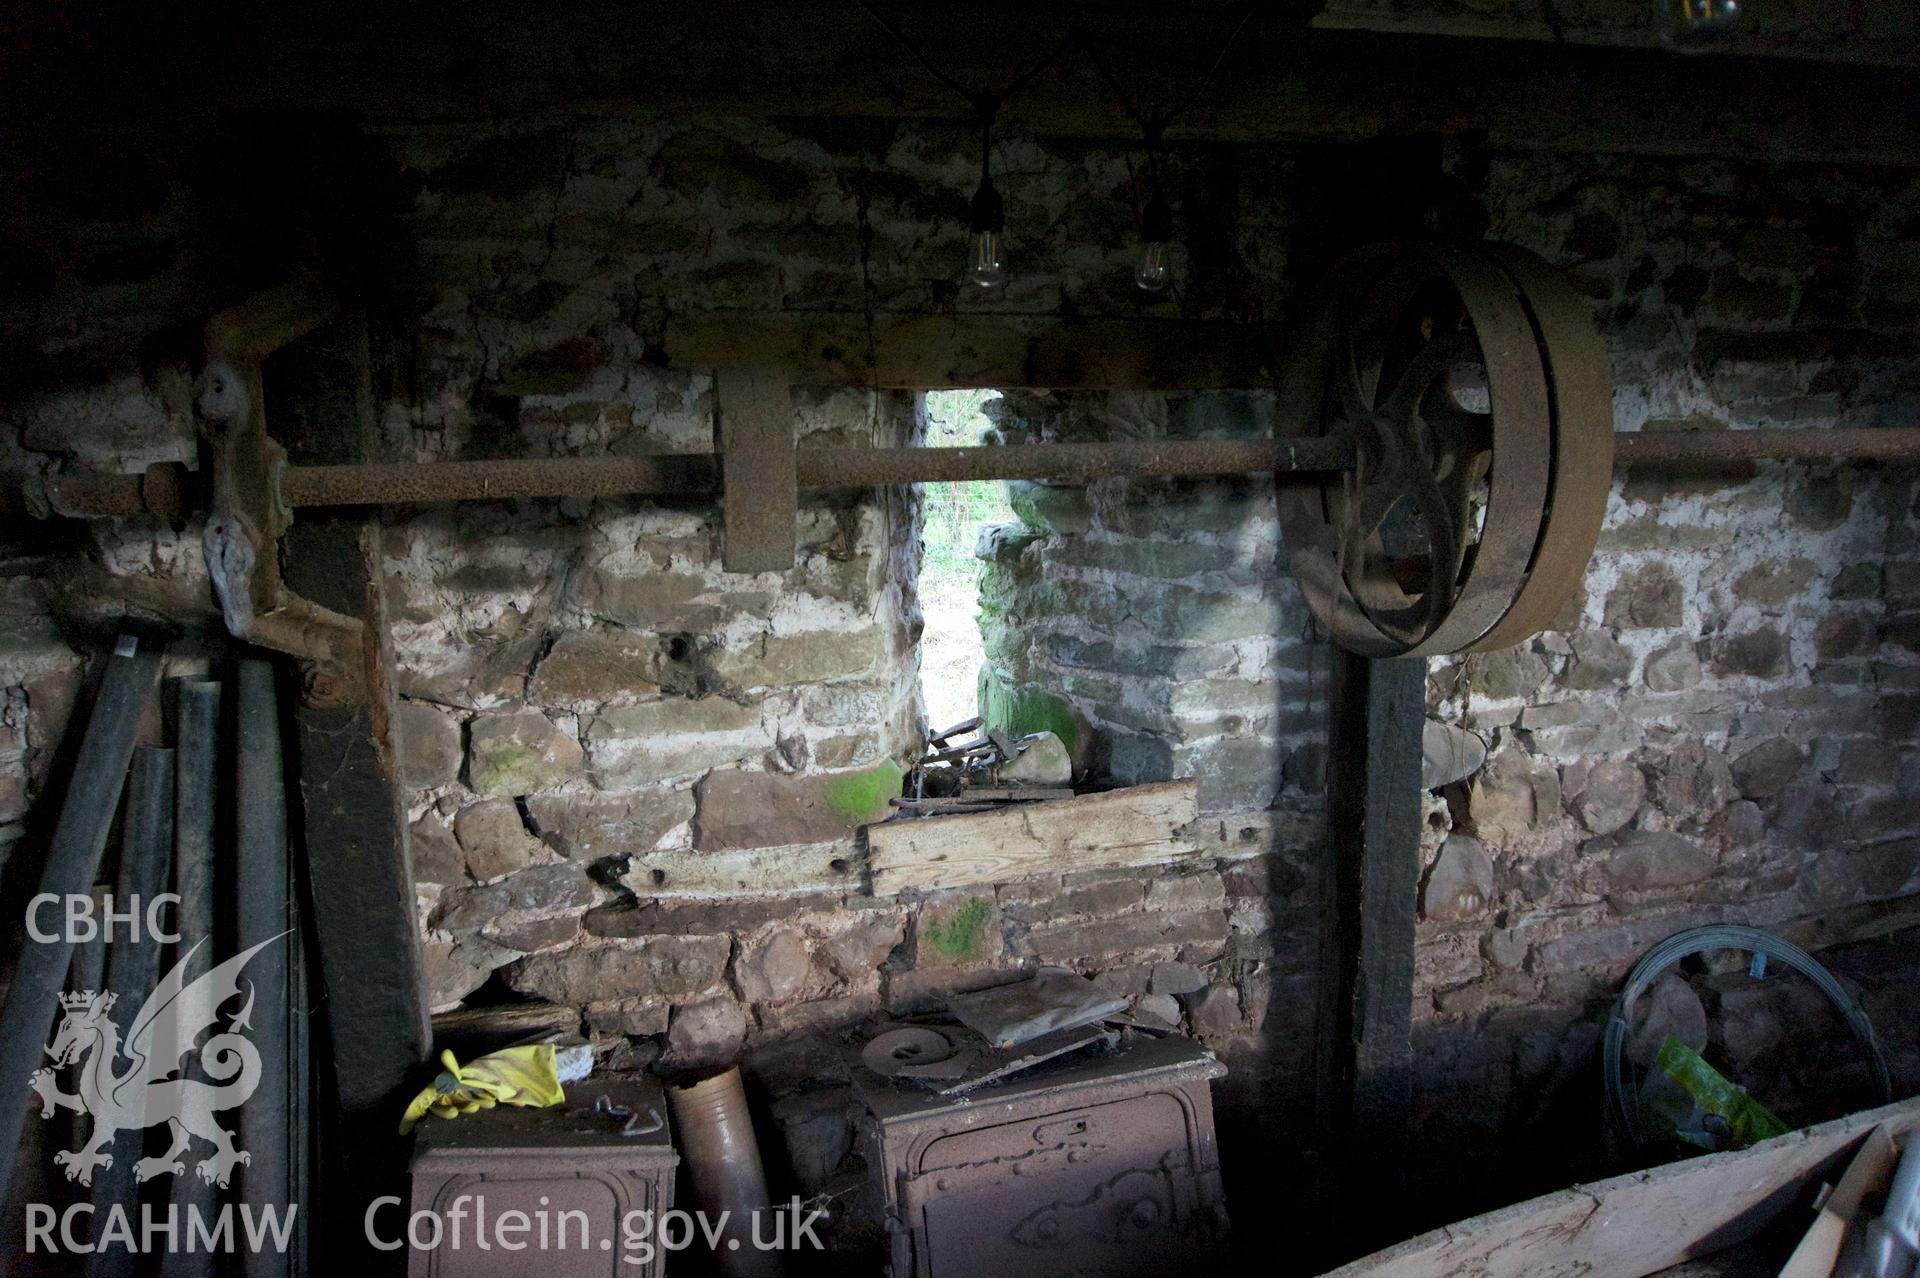 Inside of east gable wall below mezzanine showing slit window reveal & historic machinery at  Threshing Barn. Photographed for Historic Building Photographic Record of Middle Ton Threshing Barn, Llanvapley, by Dan Courtney of Cog Architects, 2019.